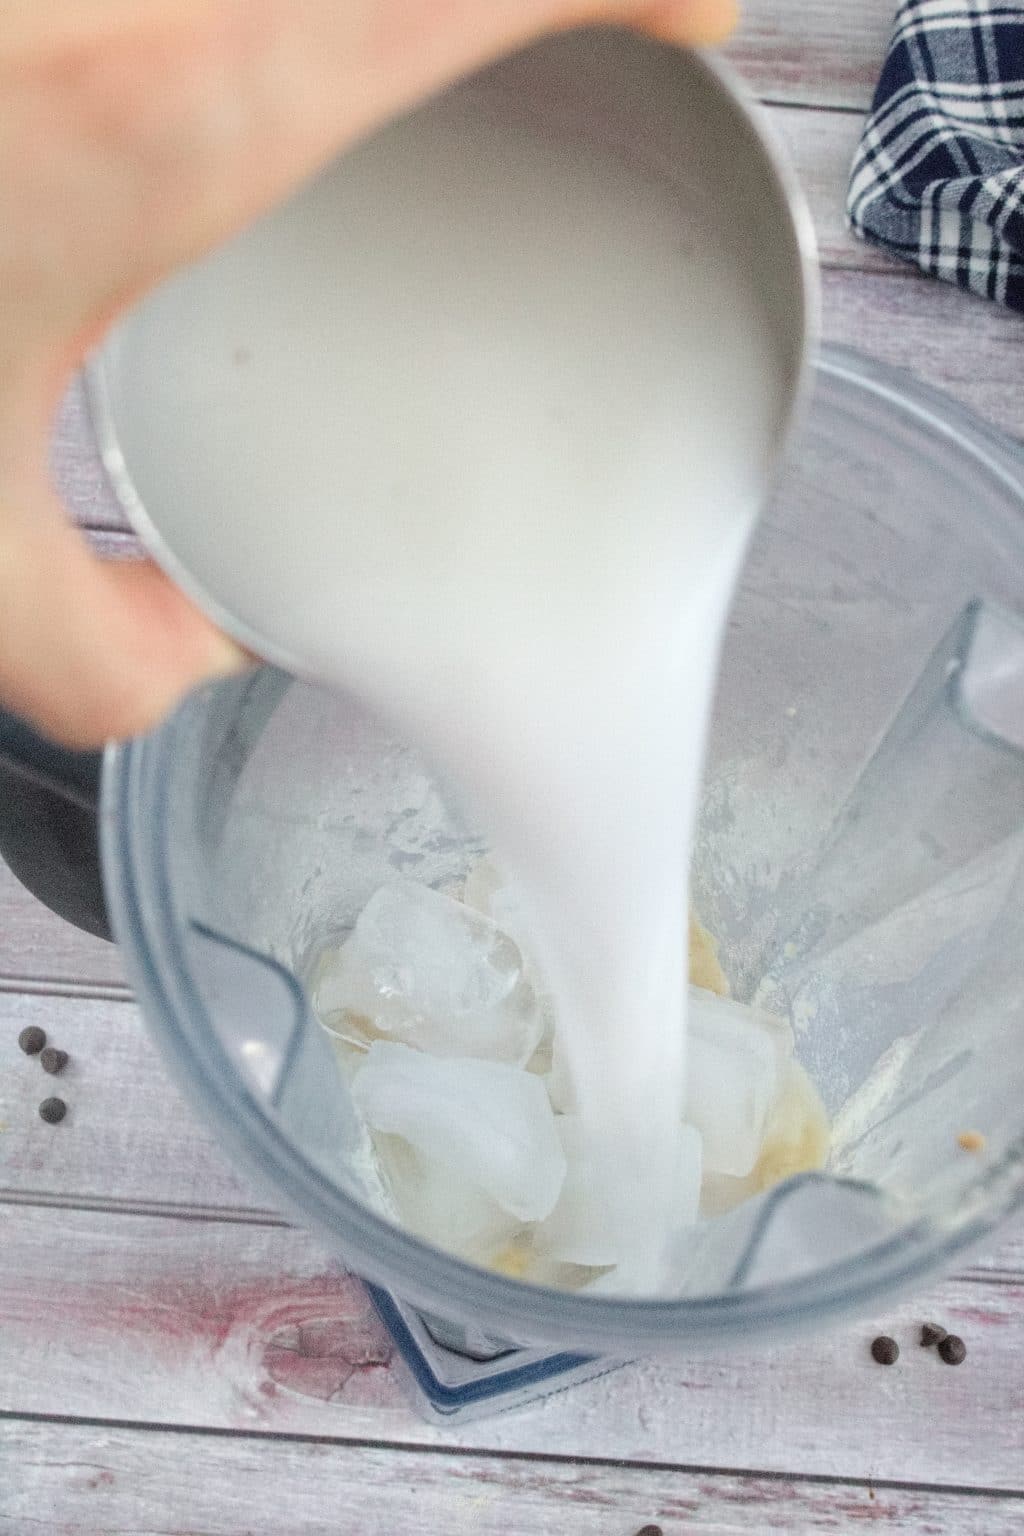 Hemp milk being poured into a blender with protein powder and ice cubes